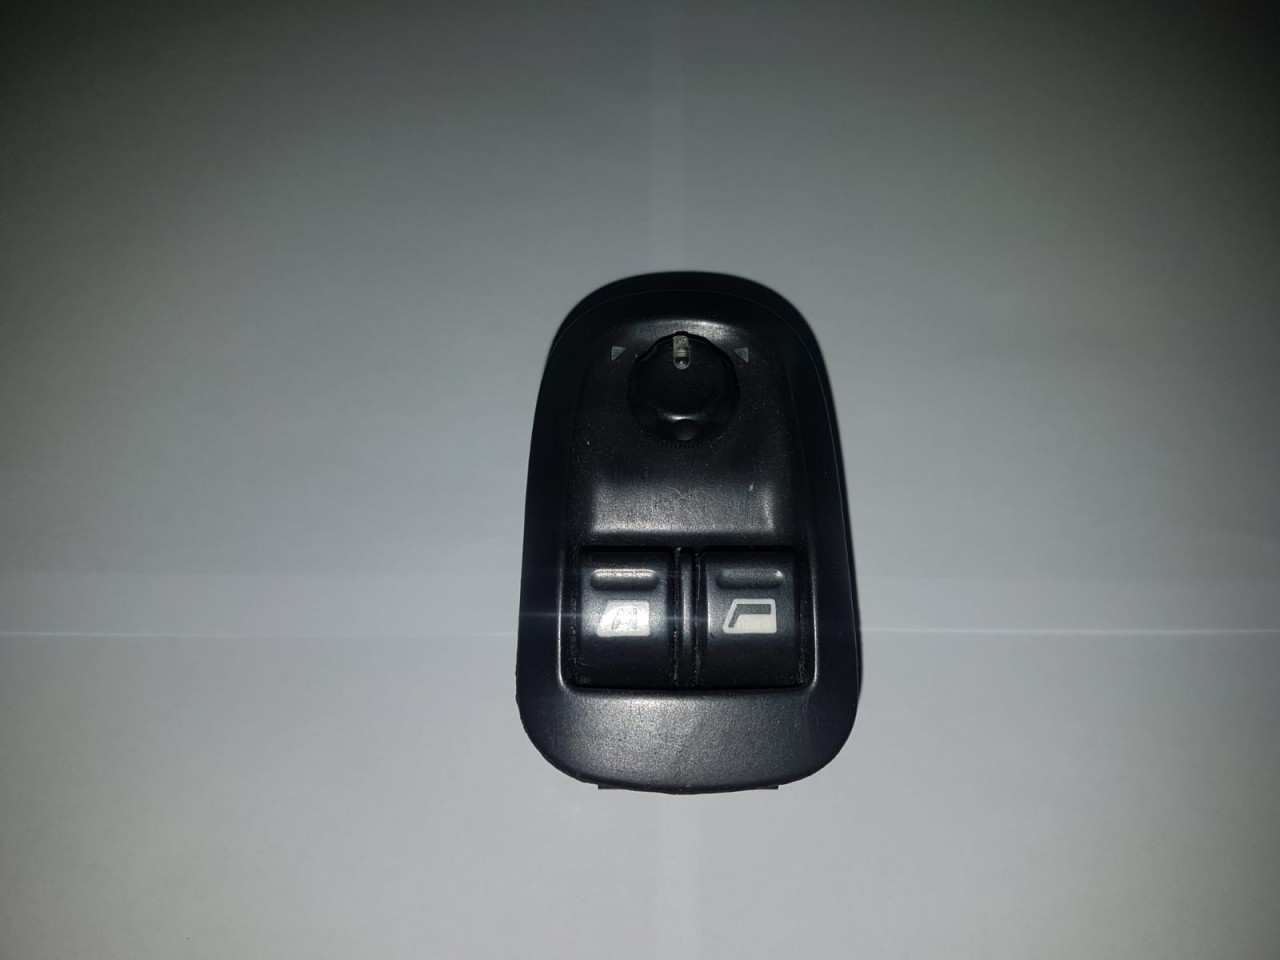 Vand piese si accesorii PEUGEOT 206 HATCHBACK  2 USI, AUTO PERSONAL,2.0HDI,RHY90